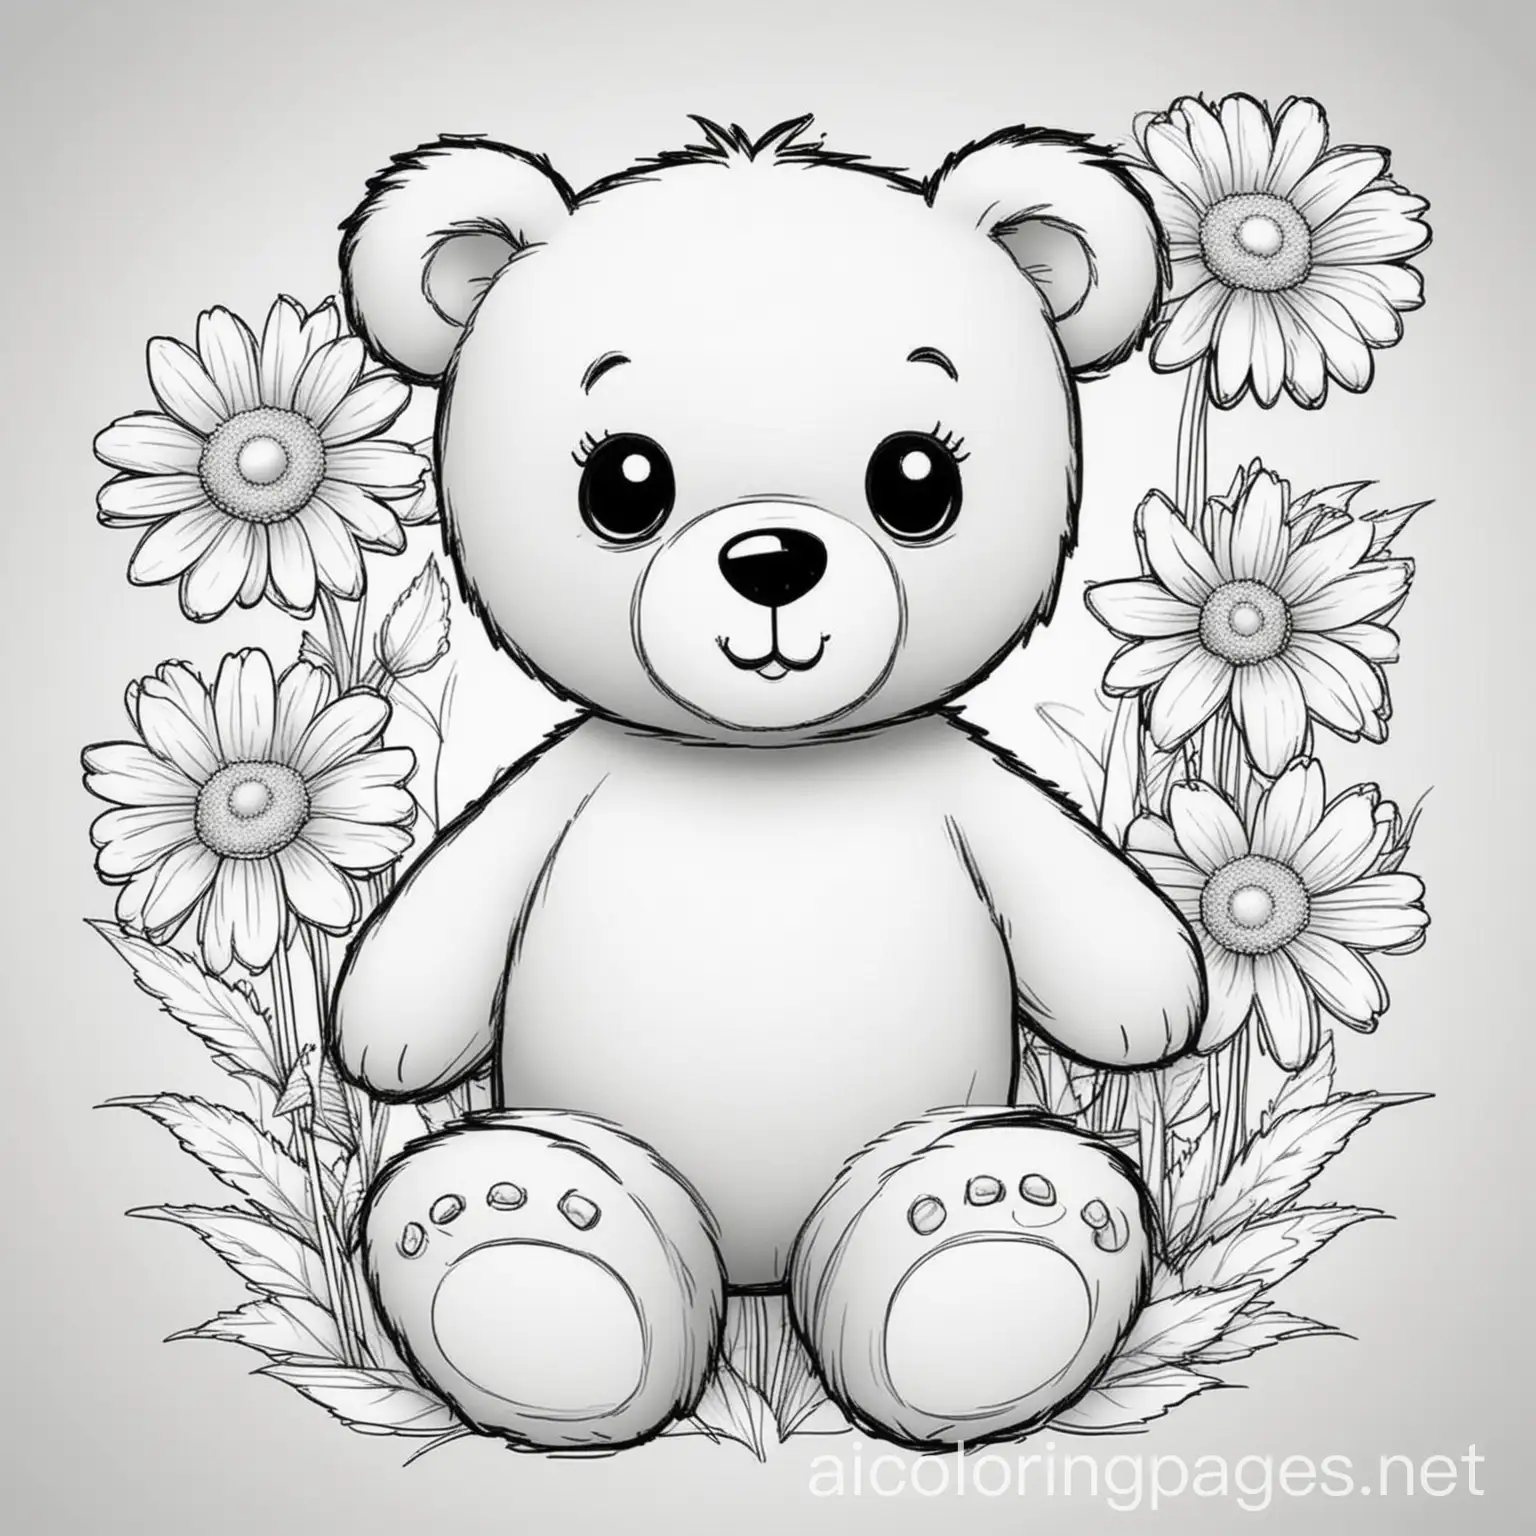 Teddy-Bear-and-Daisies-Coloring-Page-for-Children-Cartoon-Style-with-Clean-Lines